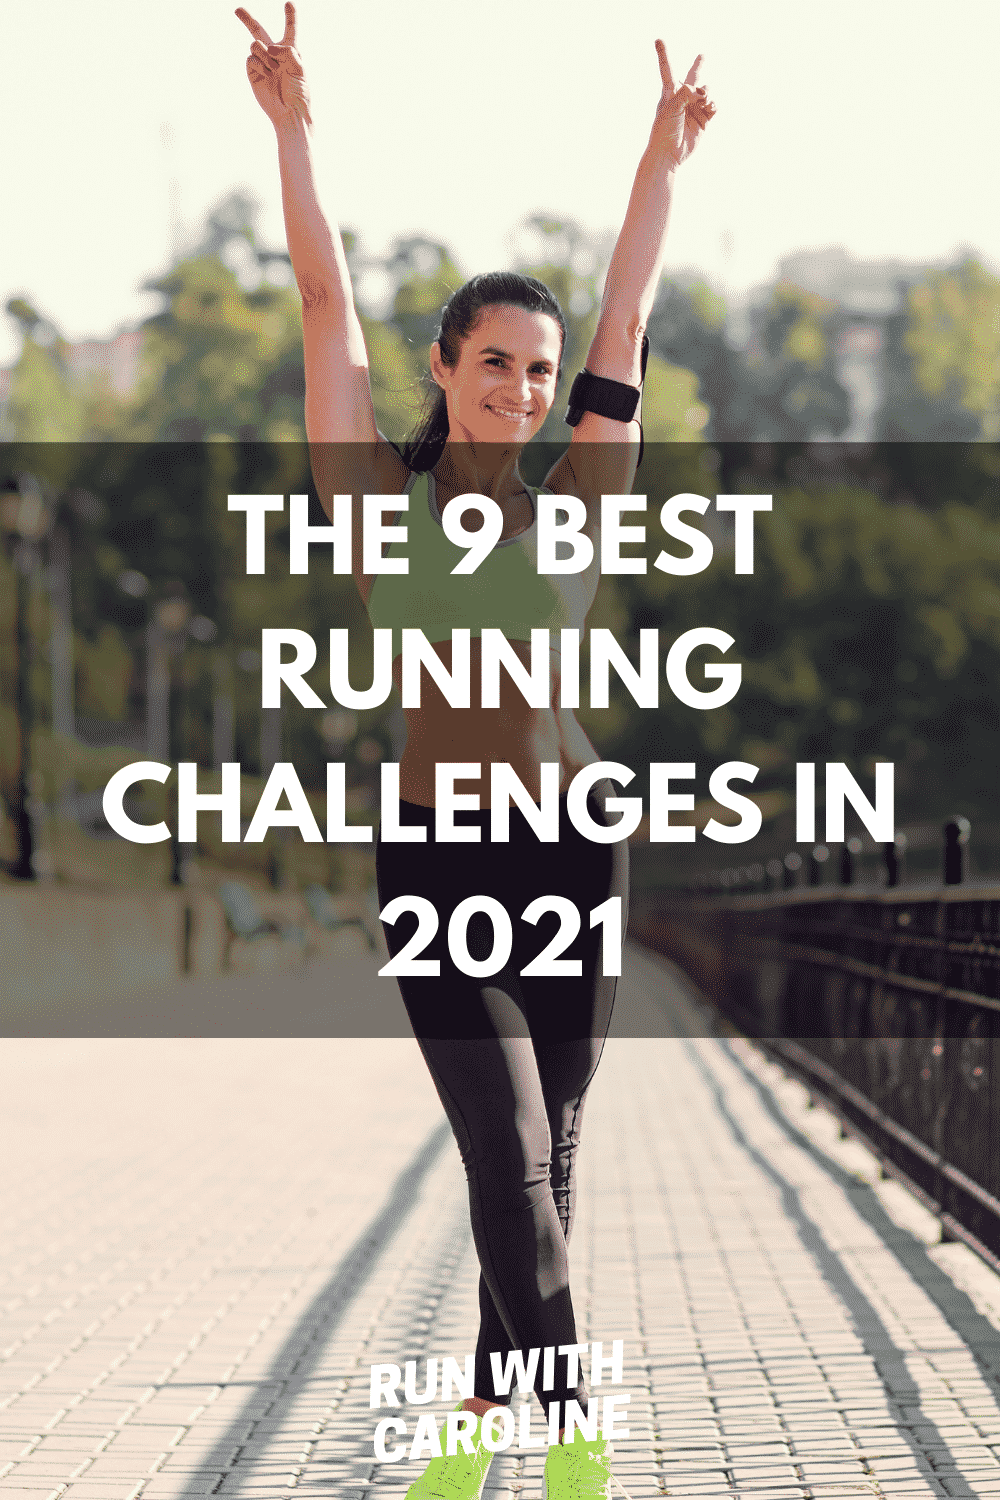 The 9 best running challenges for your strongest year of running Run